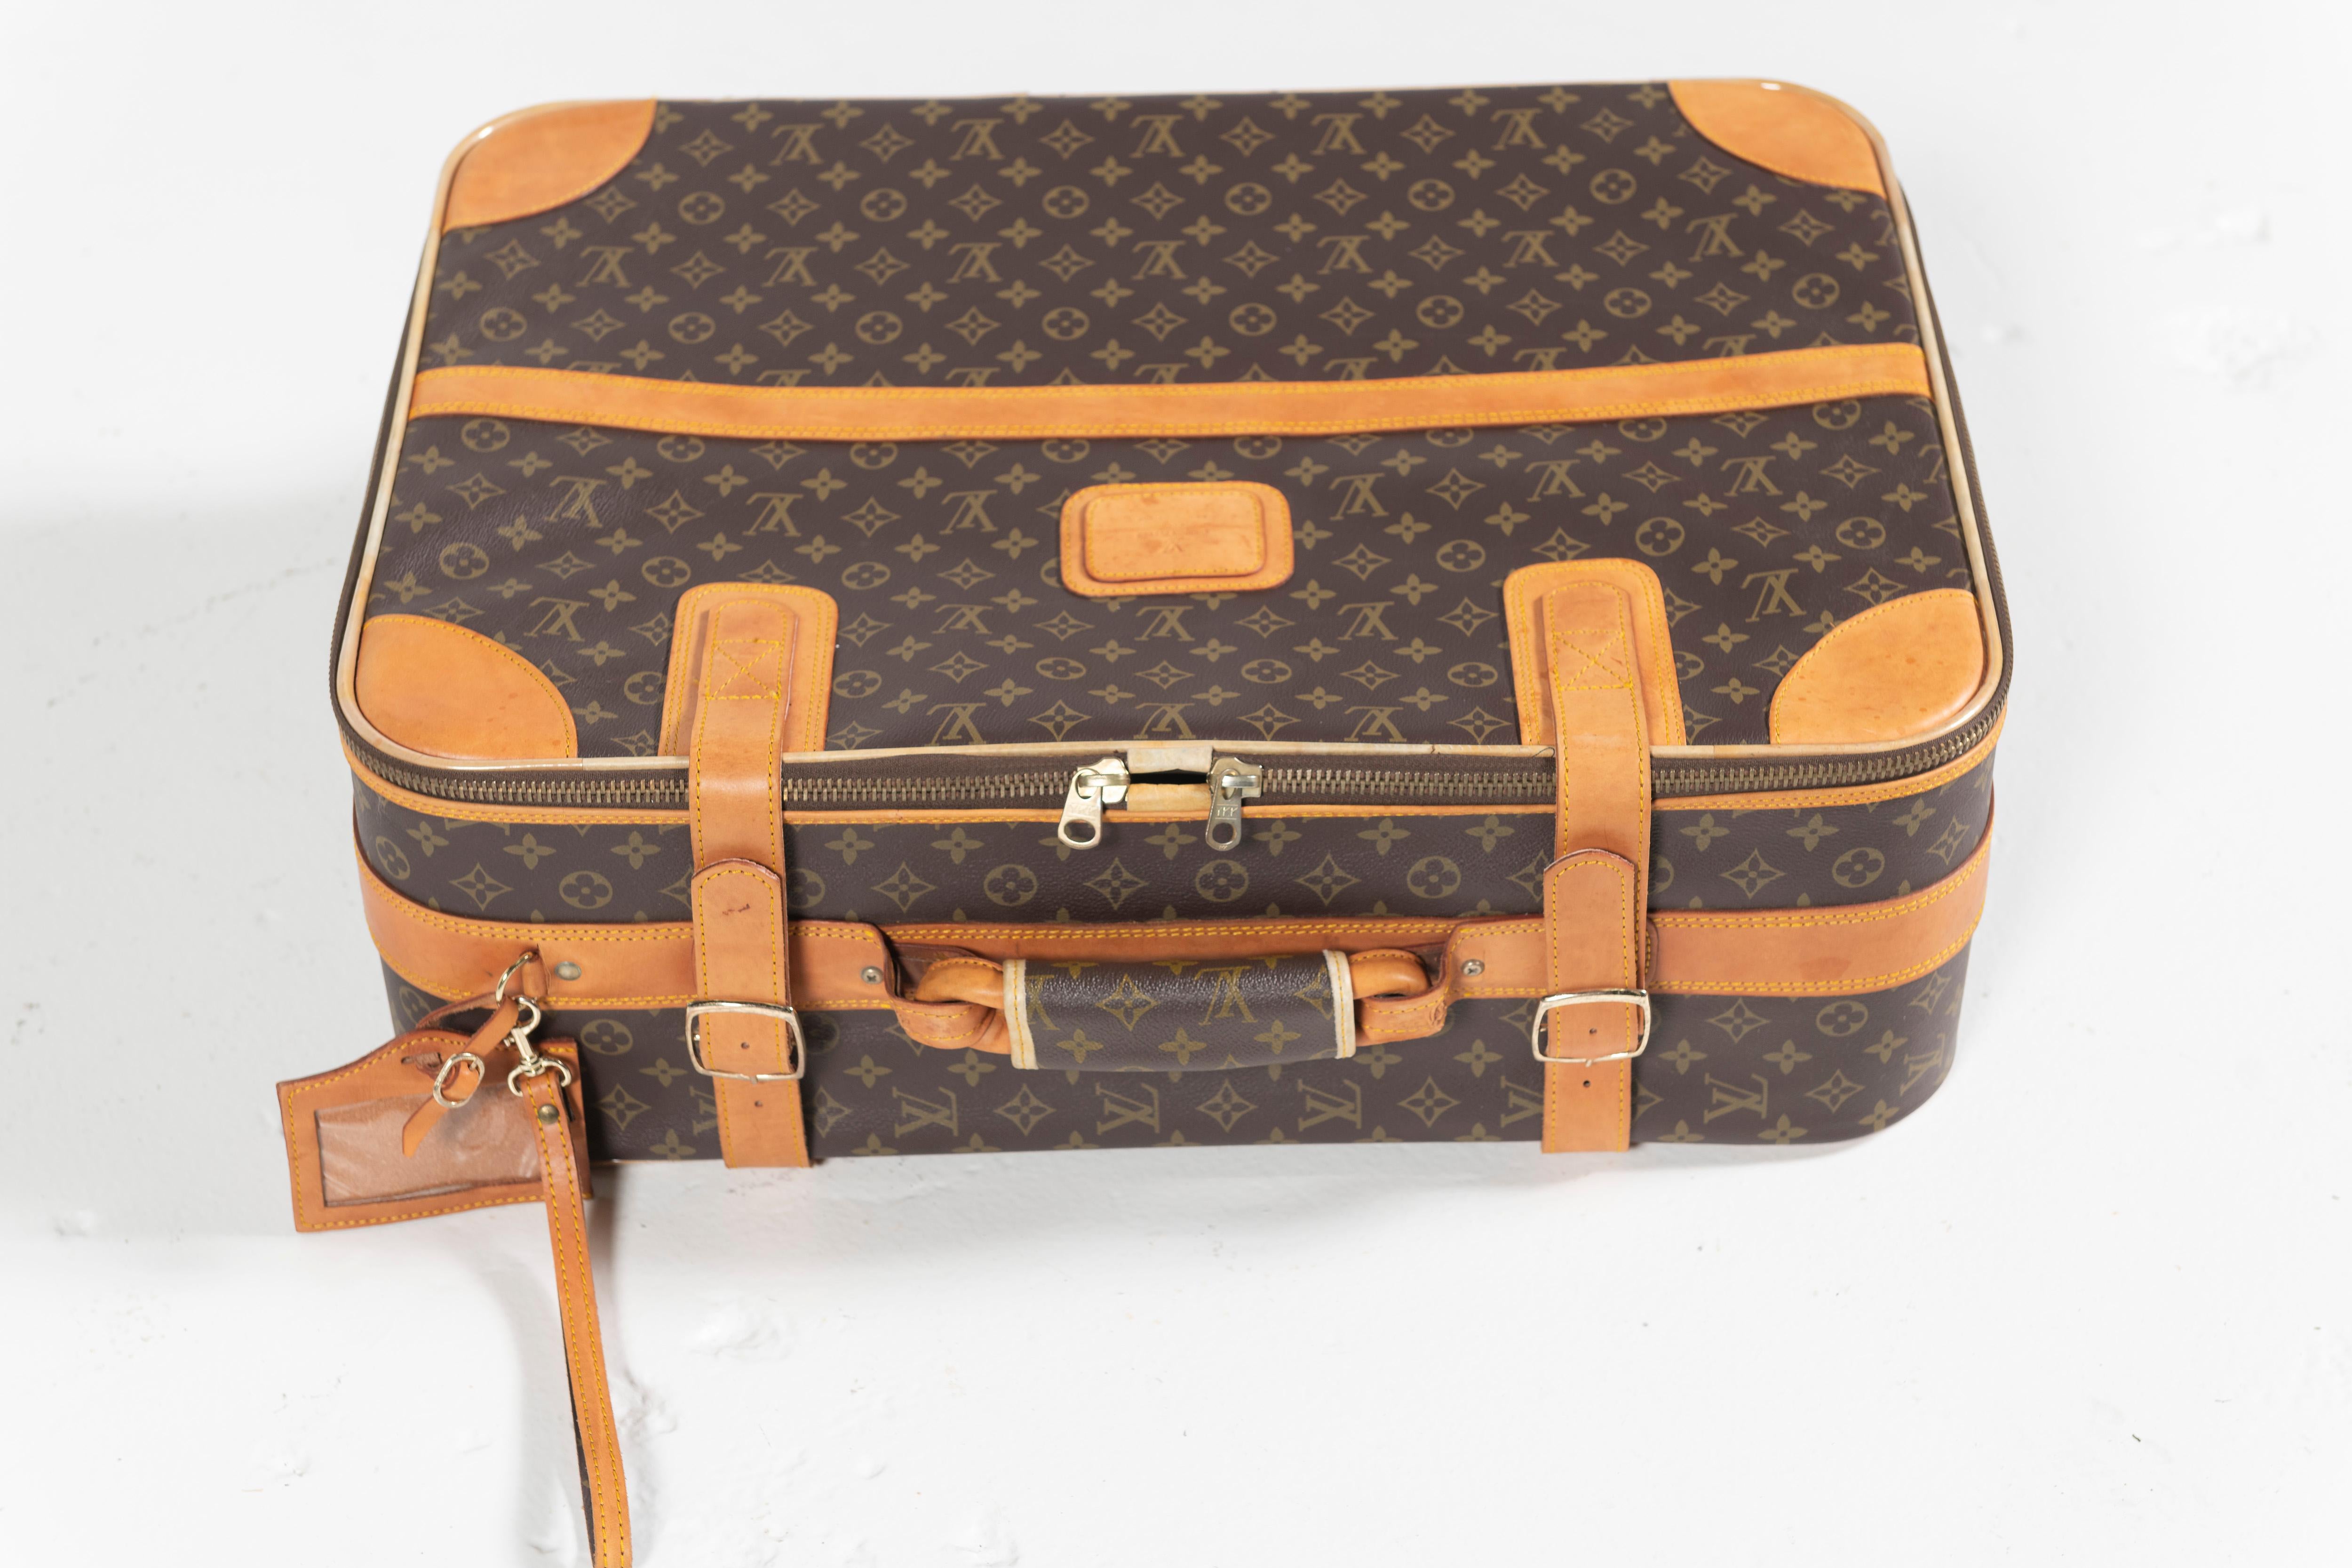 Vintage Louis Vuitton Suitcase, Monogrammed Coated Canvas, Small-Sized For Sale 6